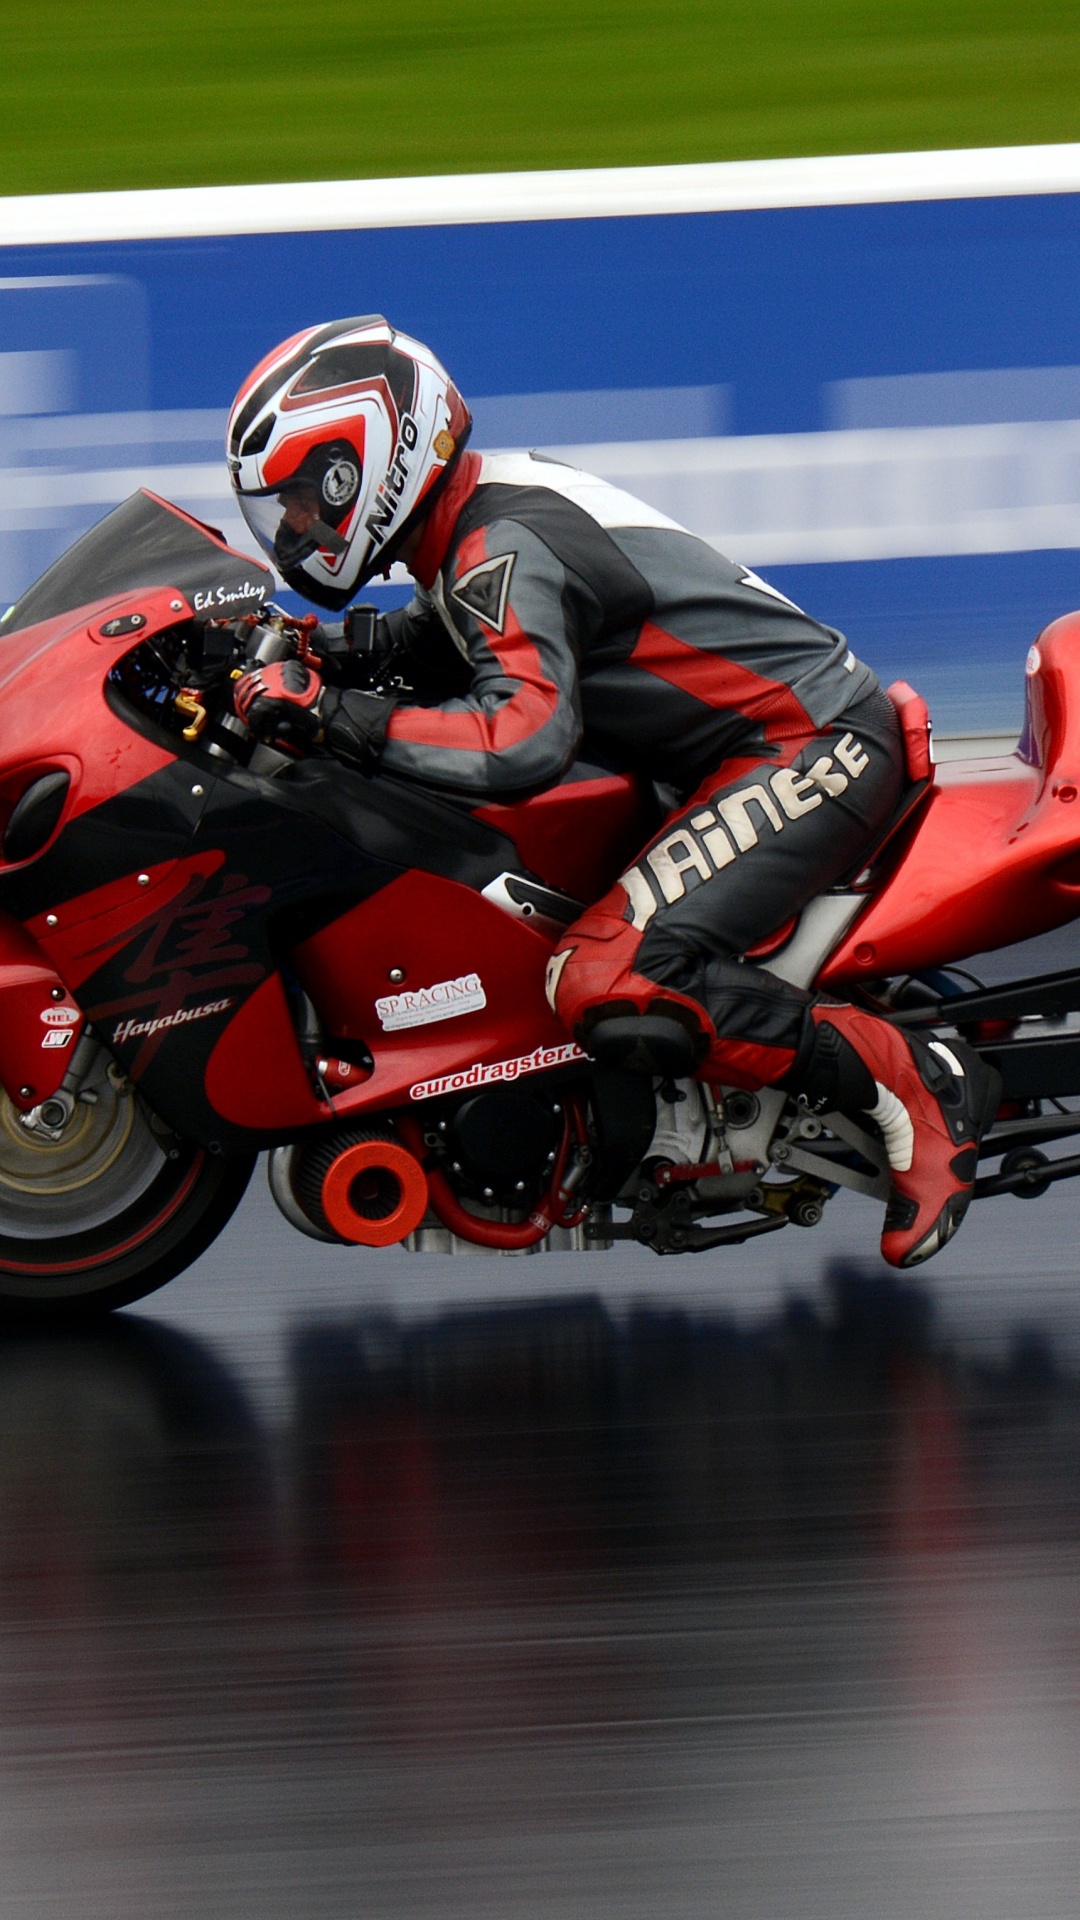 Man in Red and Black Motorcycle Helmet Riding Red Sports Bike. Wallpaper in 1080x1920 Resolution